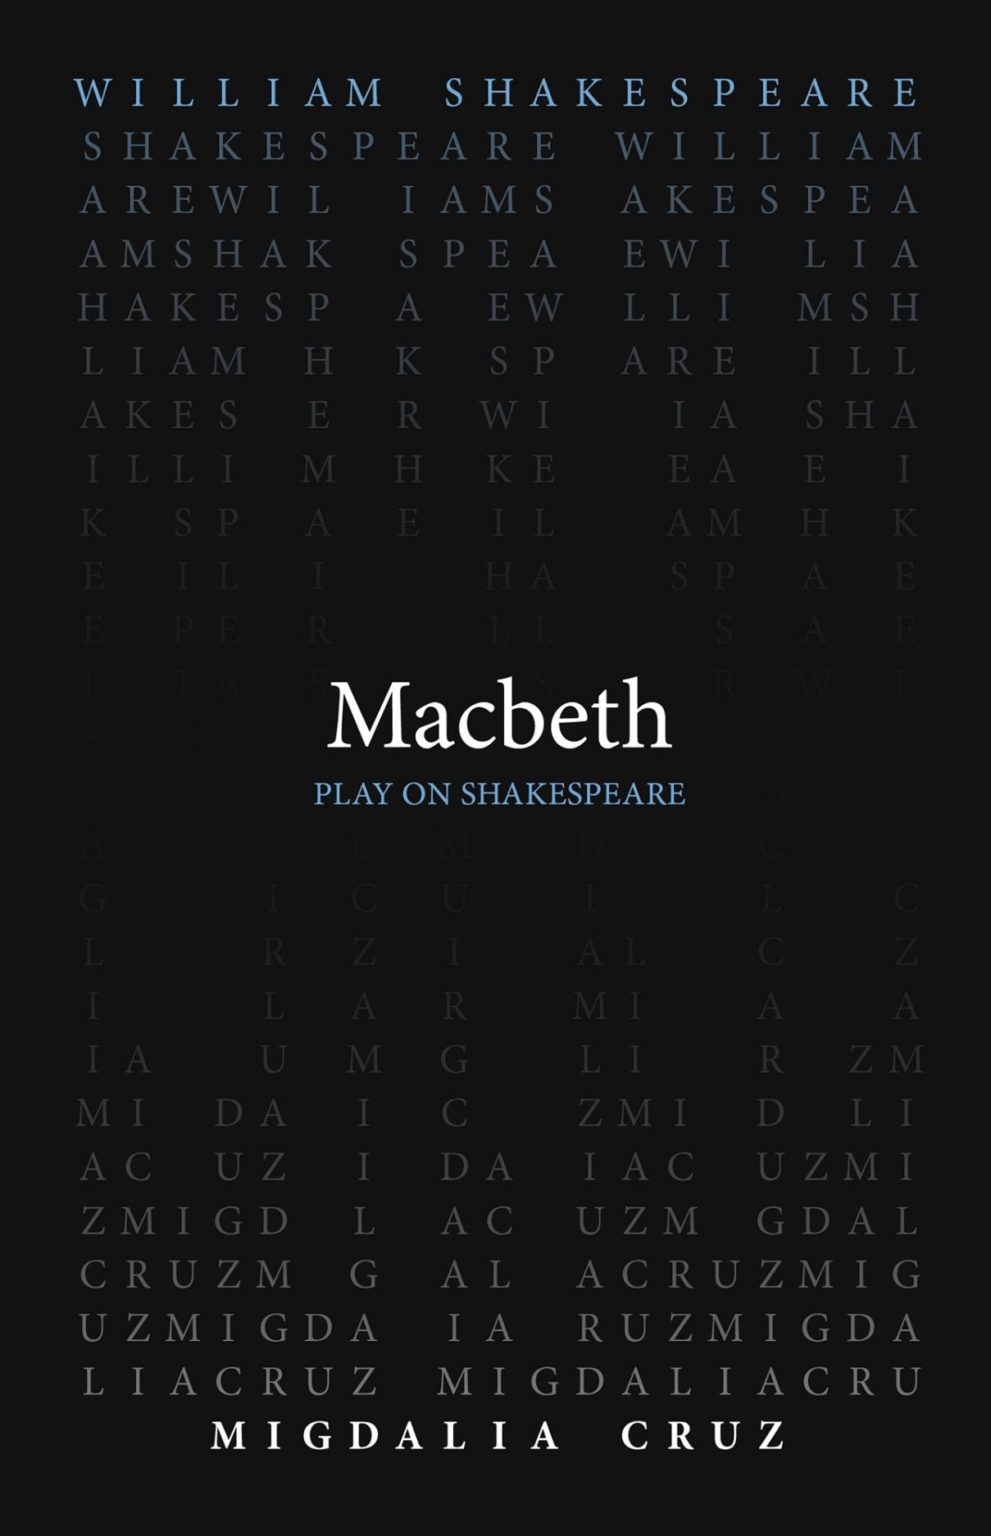 Macbeth book cover by ACMRS Press